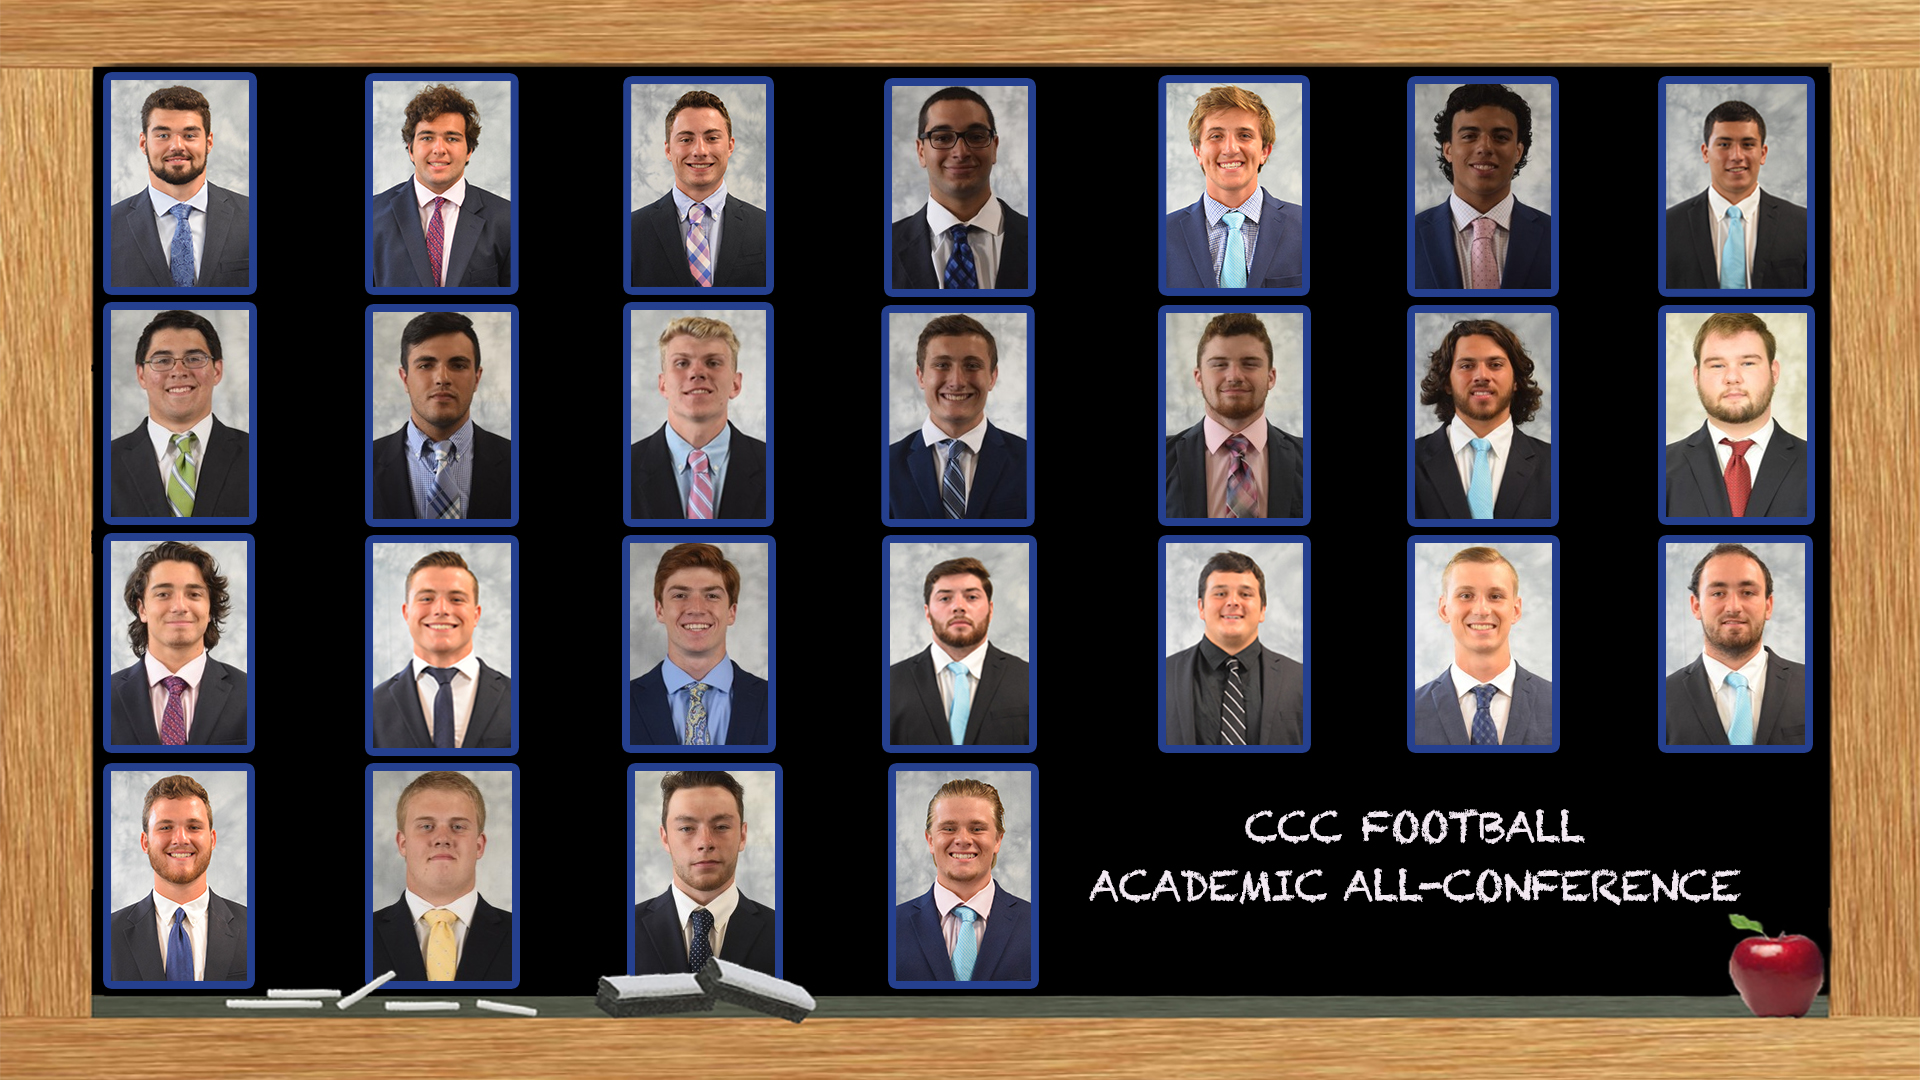 25 members of the Salve Regina football team were named to the Academic All-Conference team.